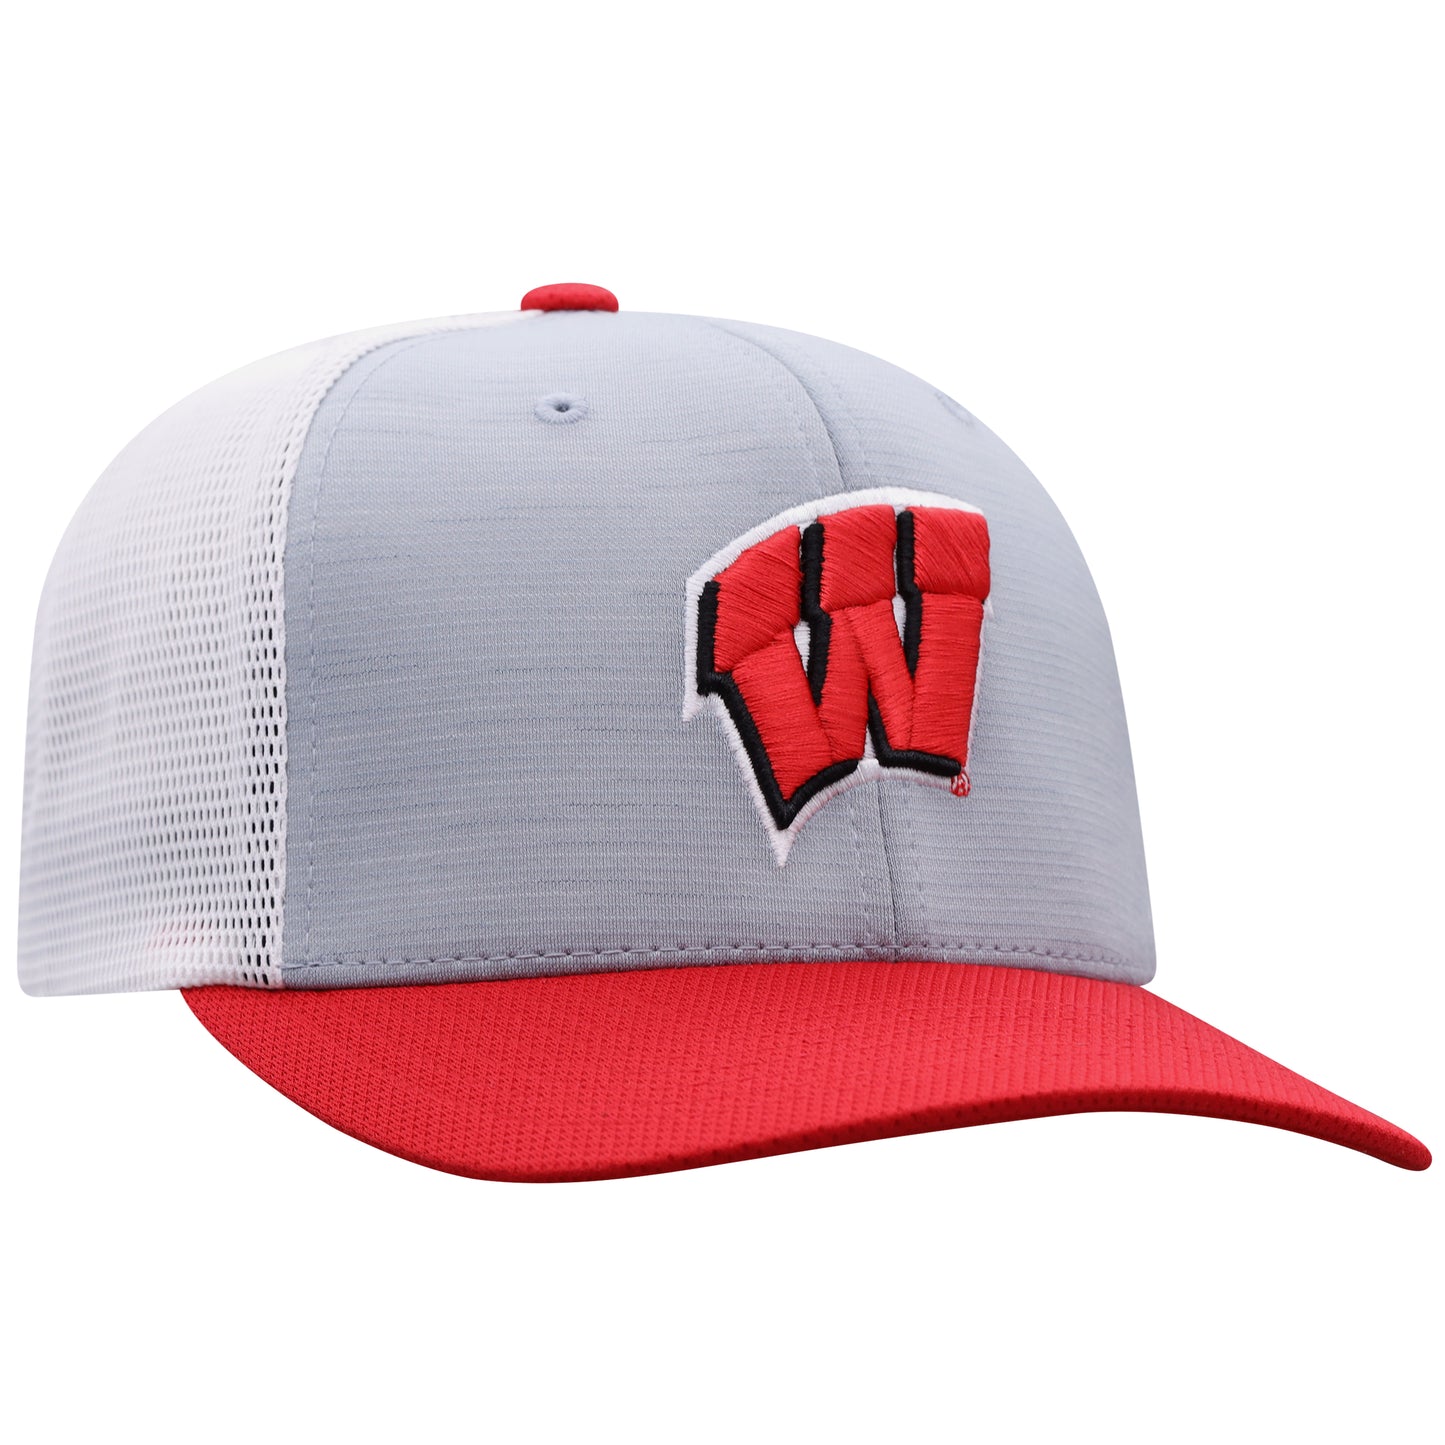 Men's Wisconsin Badgers Stamp 3-Tone Flex Fit Hat By Top Of the World